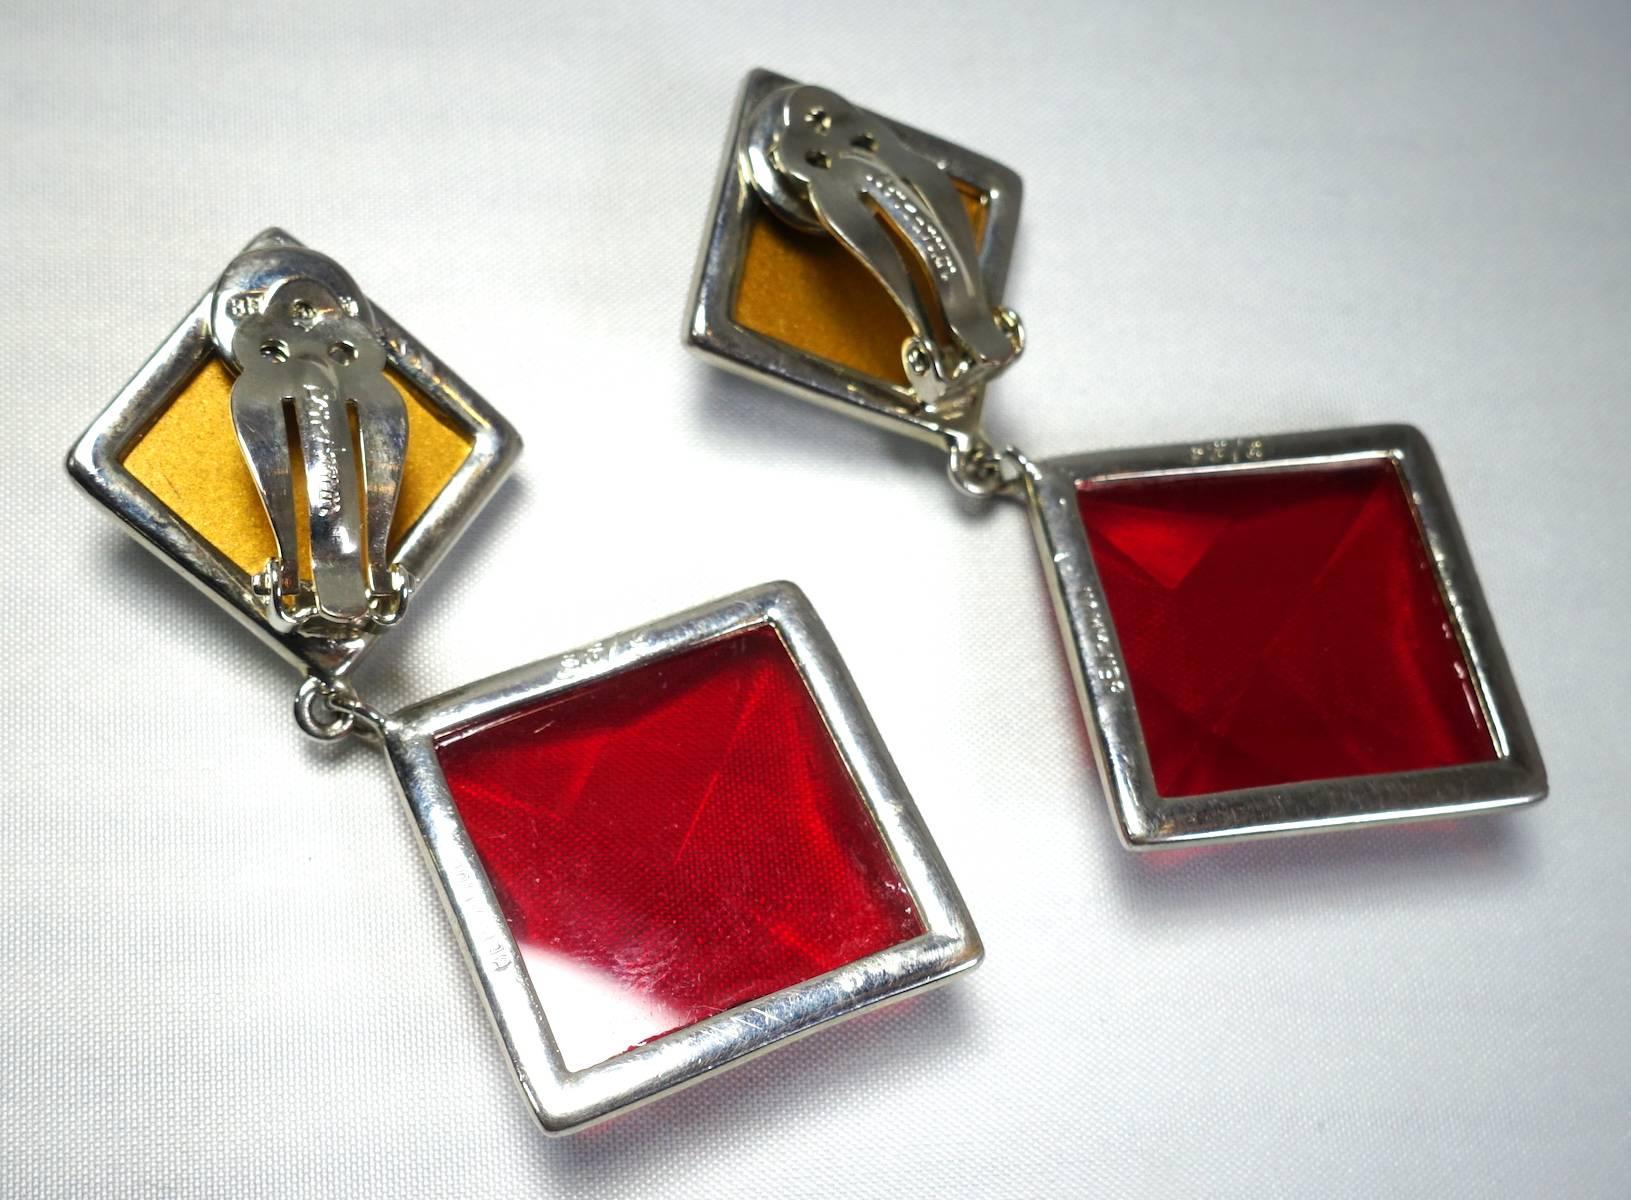 This stunning vintage signed Ben Amun earrings feature large red and clear stones in a silver tone setting.  These clip earrings measure 3” x 1-1/2” and are signed “Ben Amun”. They are in excellent condition.